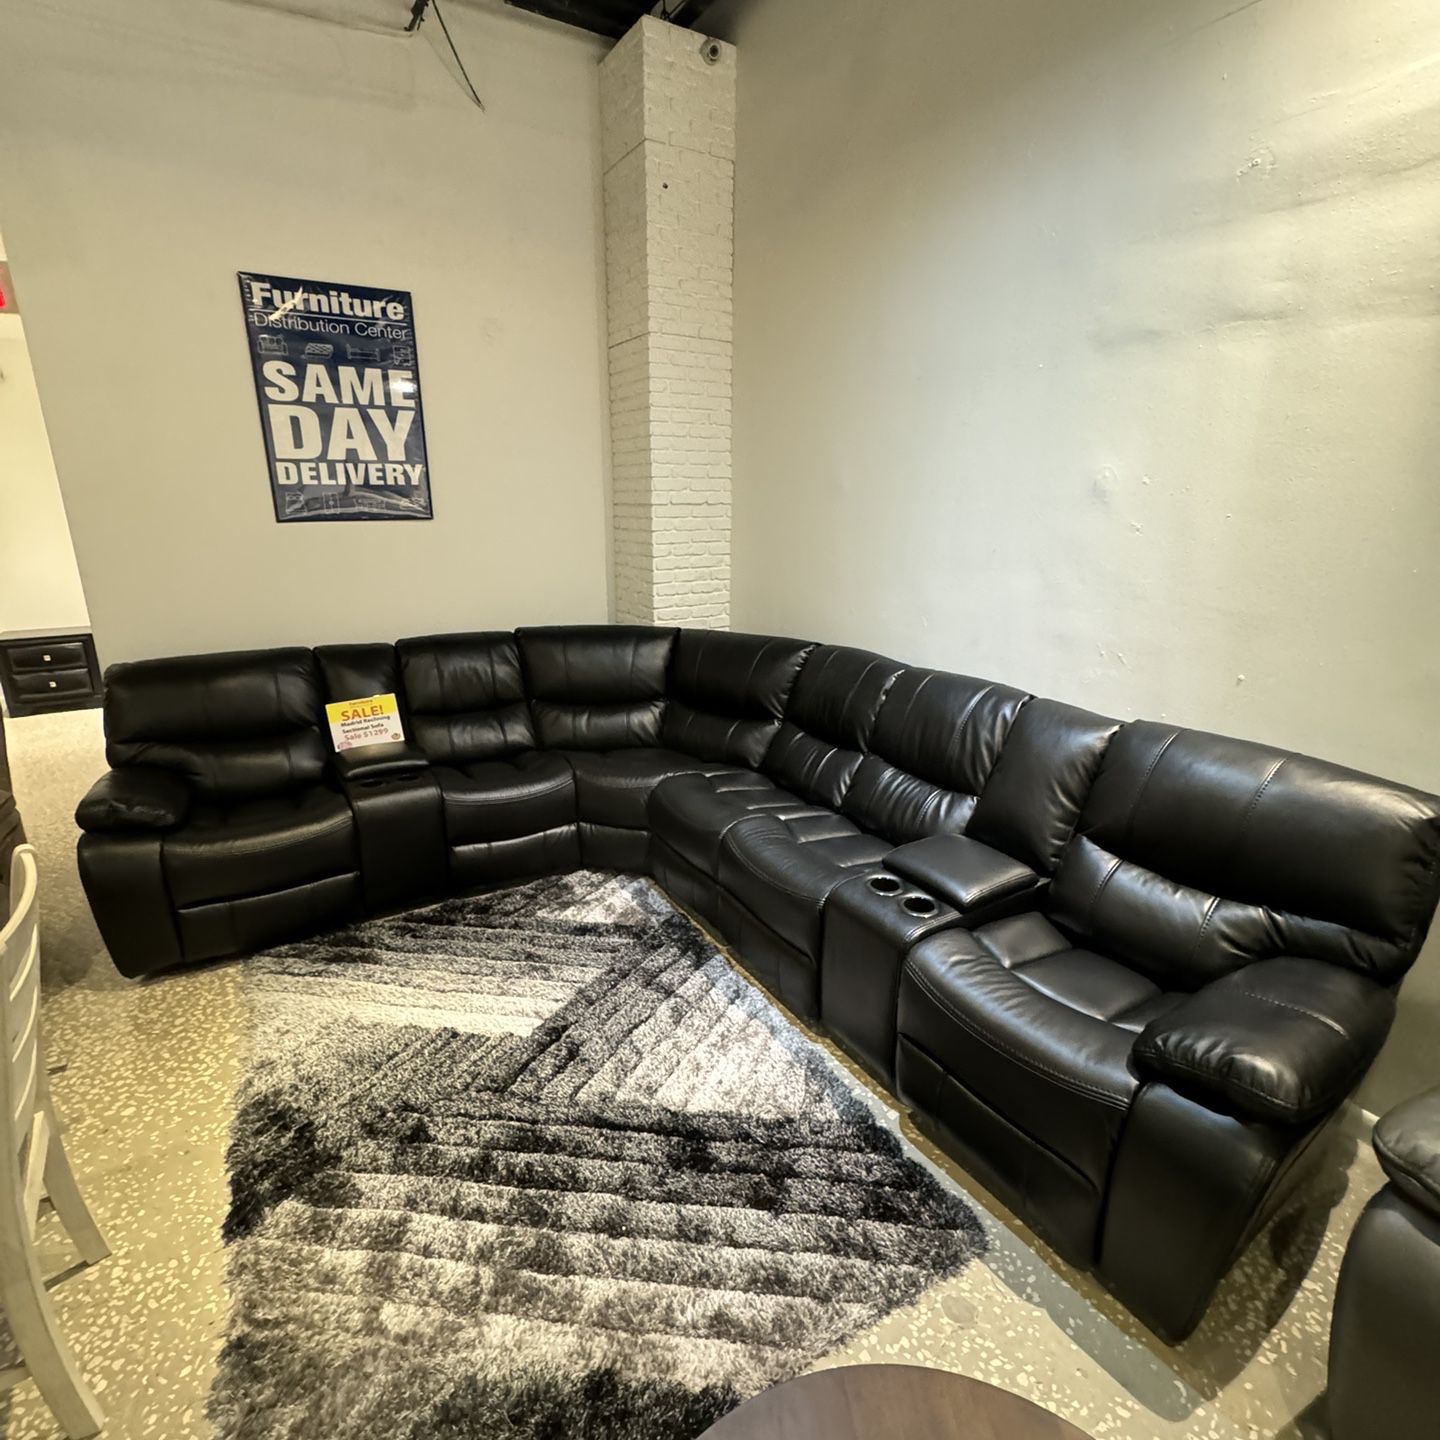 GORGEOUS BLACK MADRID SECTIONAL SOFA!$1099!*SAME DAY DELIVERY*NO CREDIT NEEDED*EASY FINANCING*HUGE SALE*